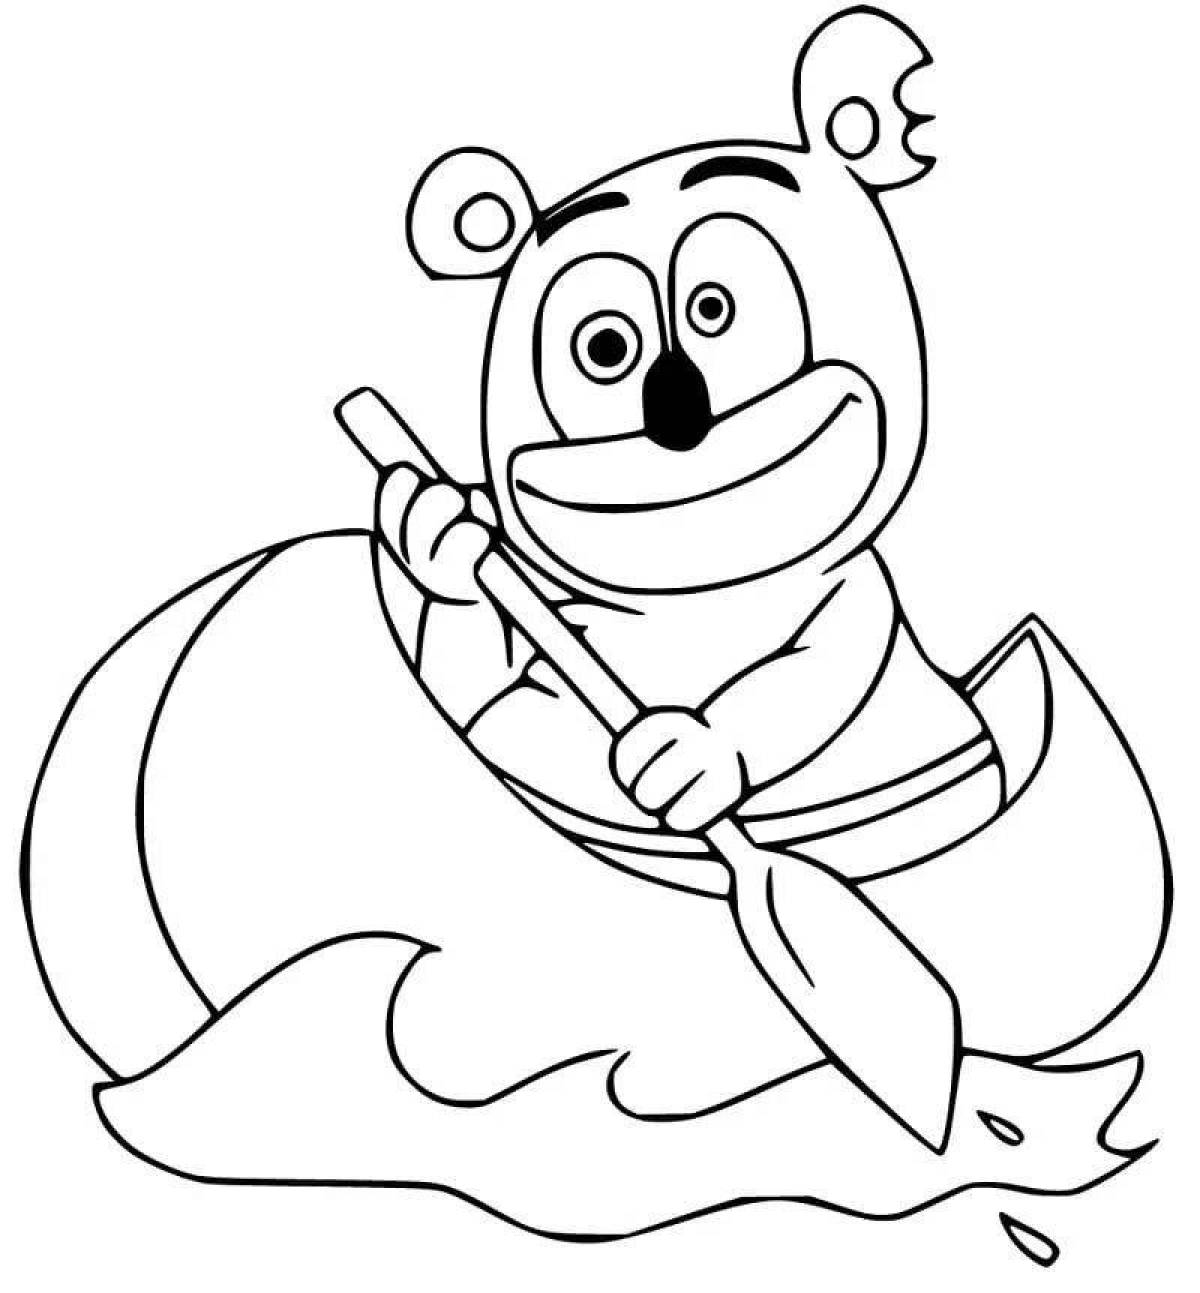 Humber bear funny coloring page